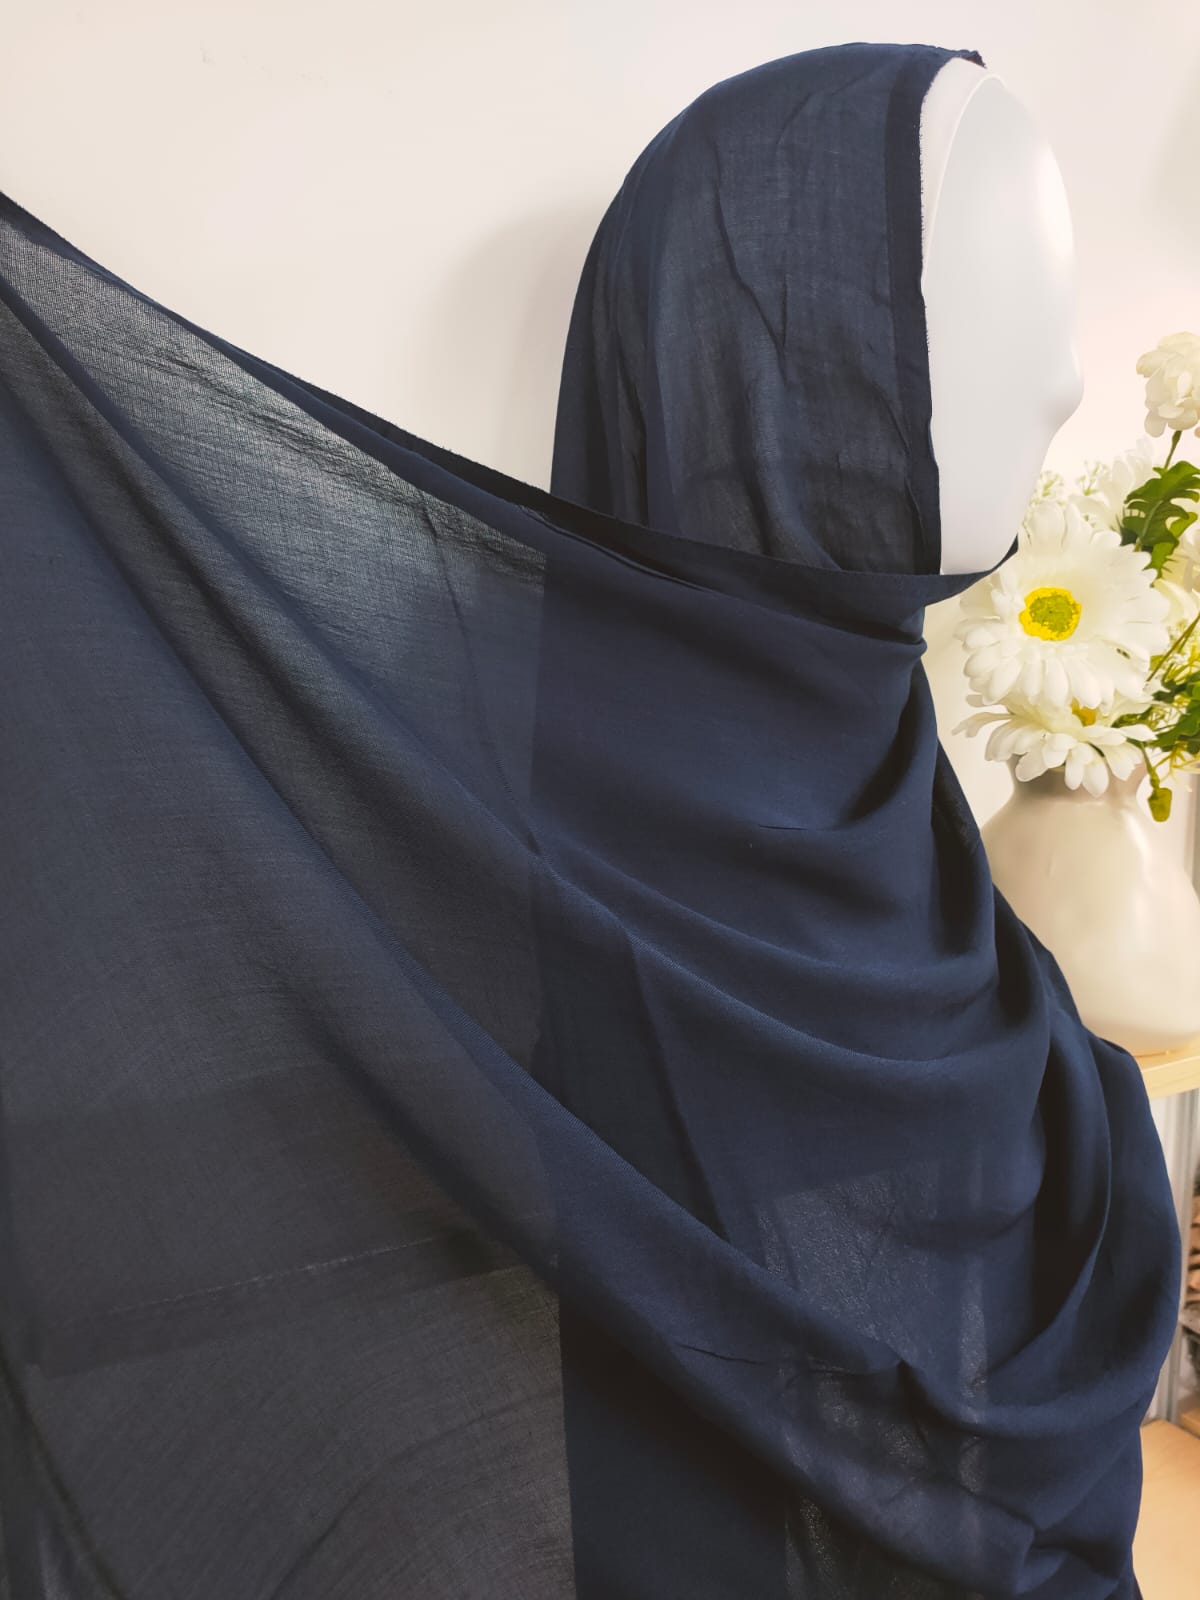 Shop now for our refined Modal Hijab in Navy, a timeless essential for your hijab collection, exclusively available at Hikmah Boutique! Carefully crafted from premium modal fabric, renowned for its luxurious softness and breathability, this hijab ensures all day comfort and style. Based in Australia, Deliver Worldwide. 